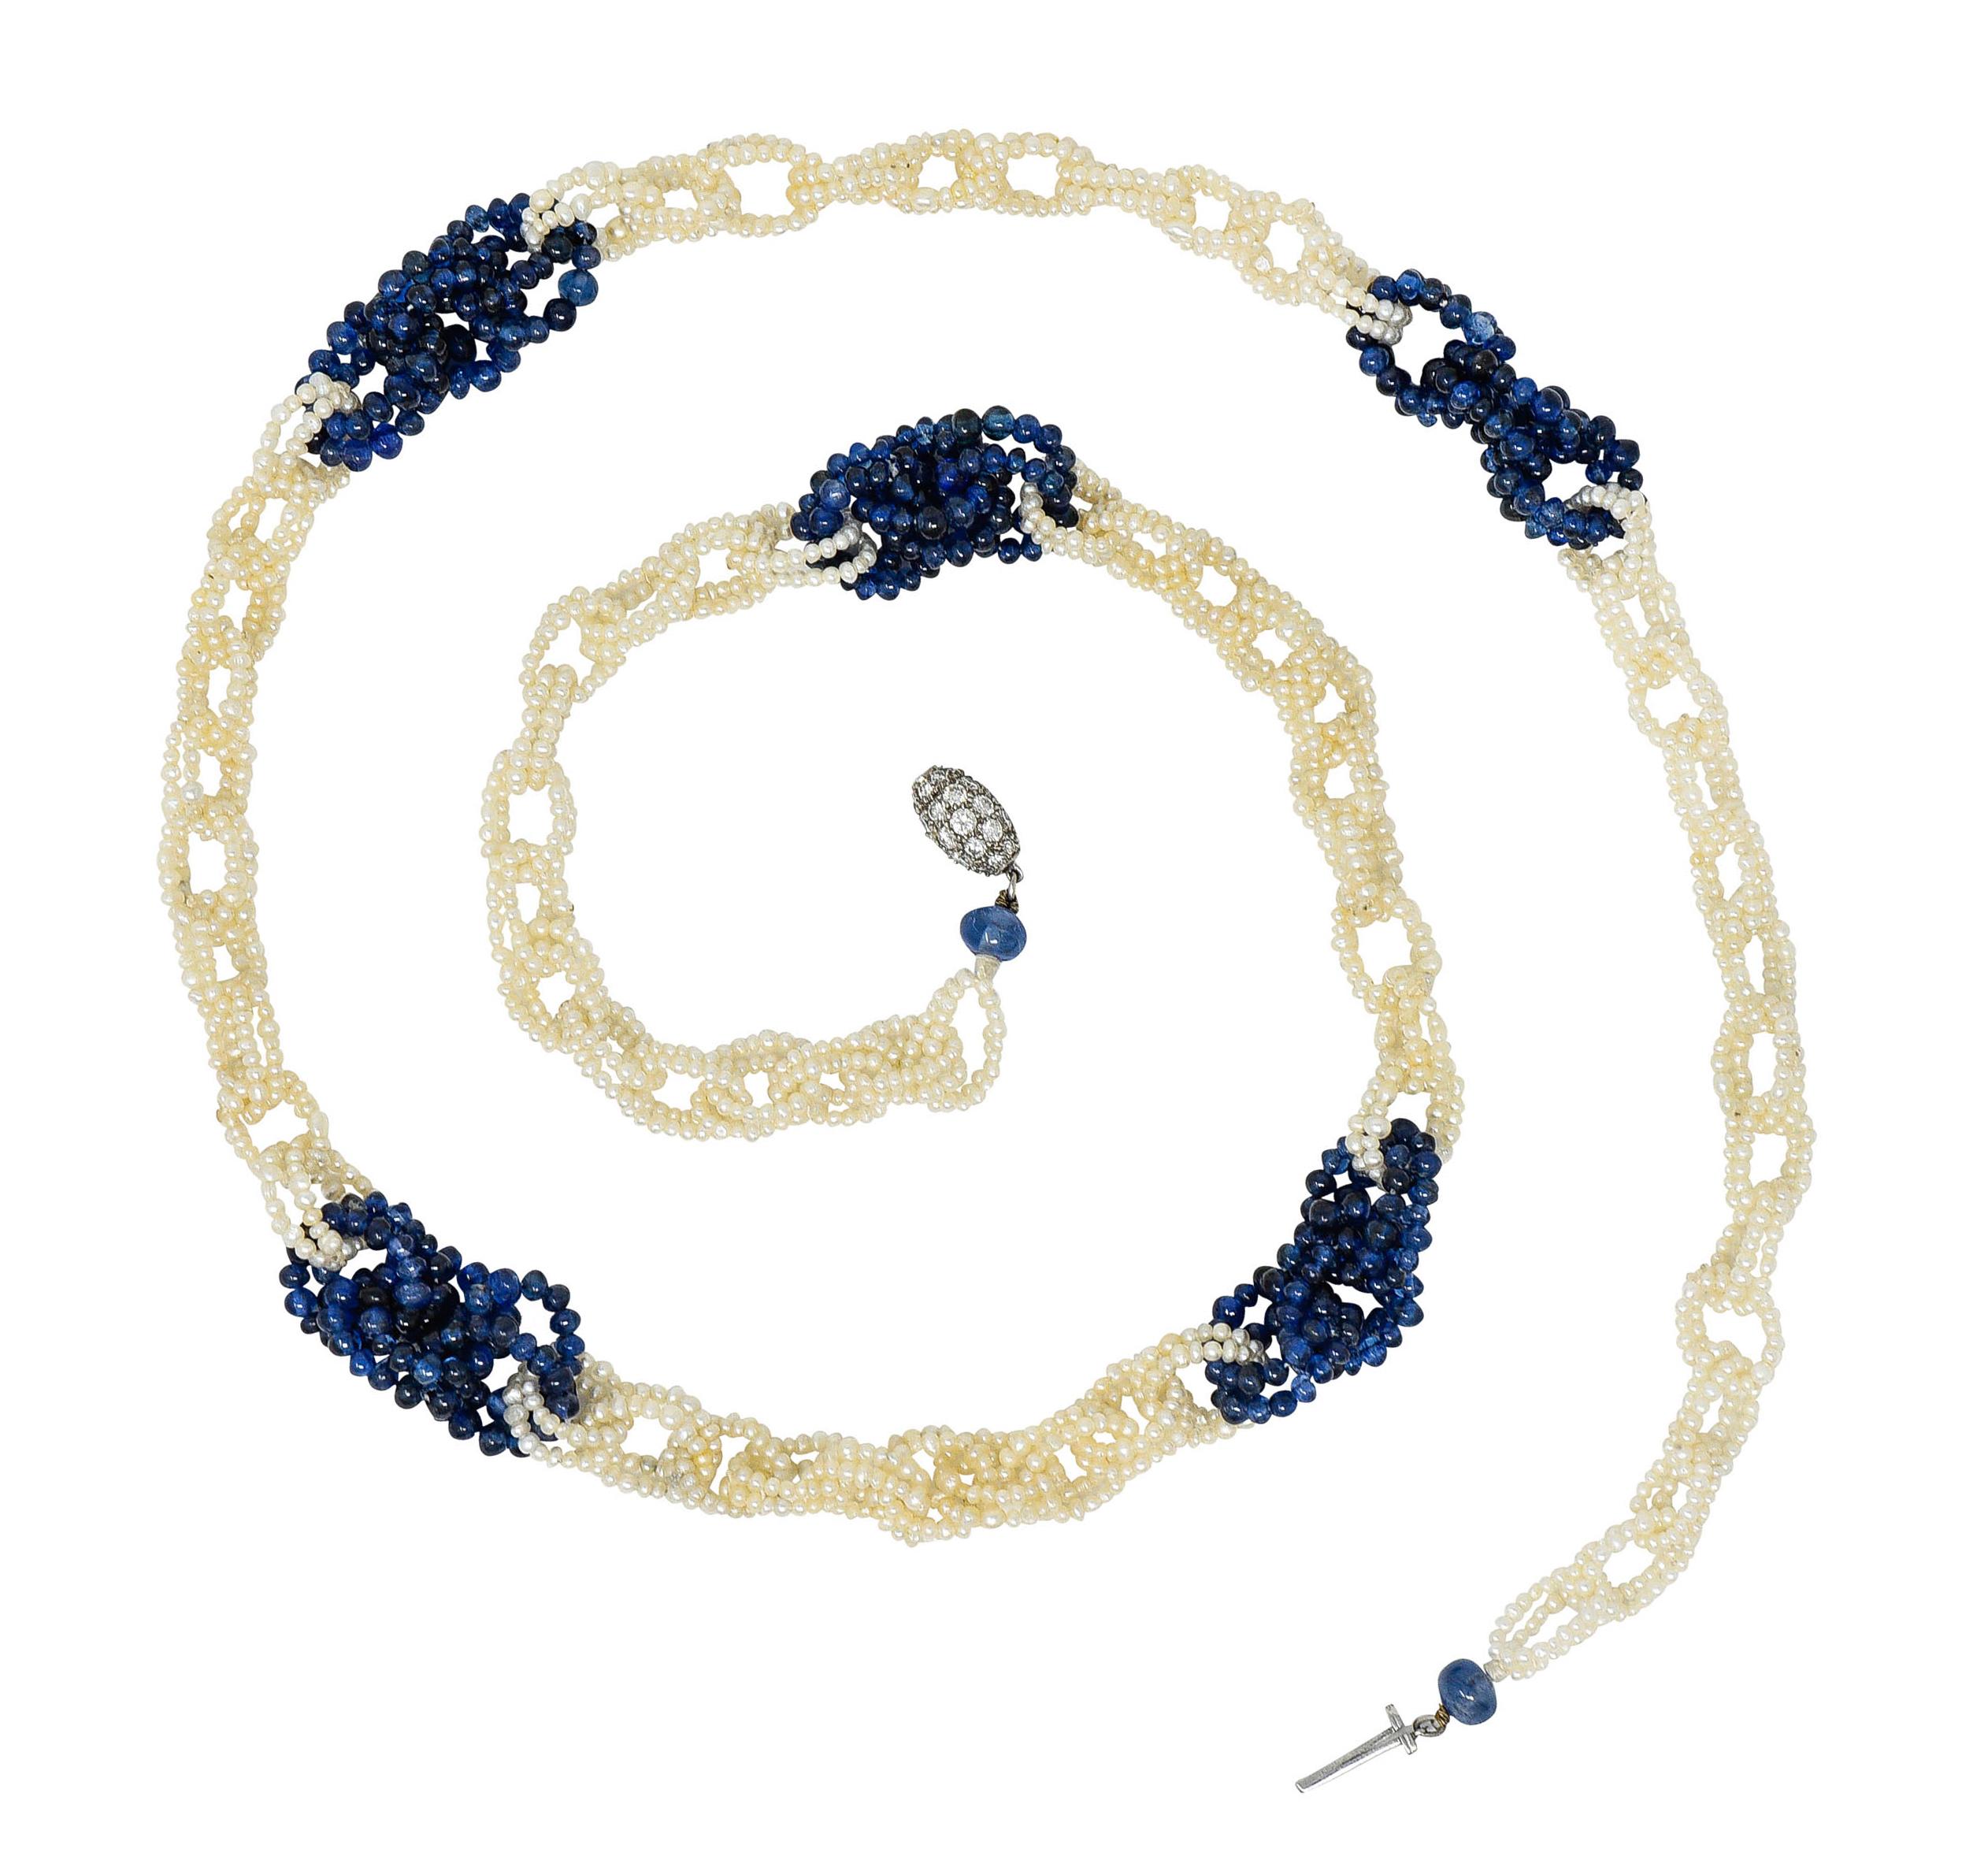 Beaded mesh necklace is comprised of oval links strung with seed pearls and sapphire beads

Seed pearls measure on average 1.6 mm and are a well matched cream color with good to very good luster

Sapphire beads measure from 2.0 mm to 5.4 mm and are